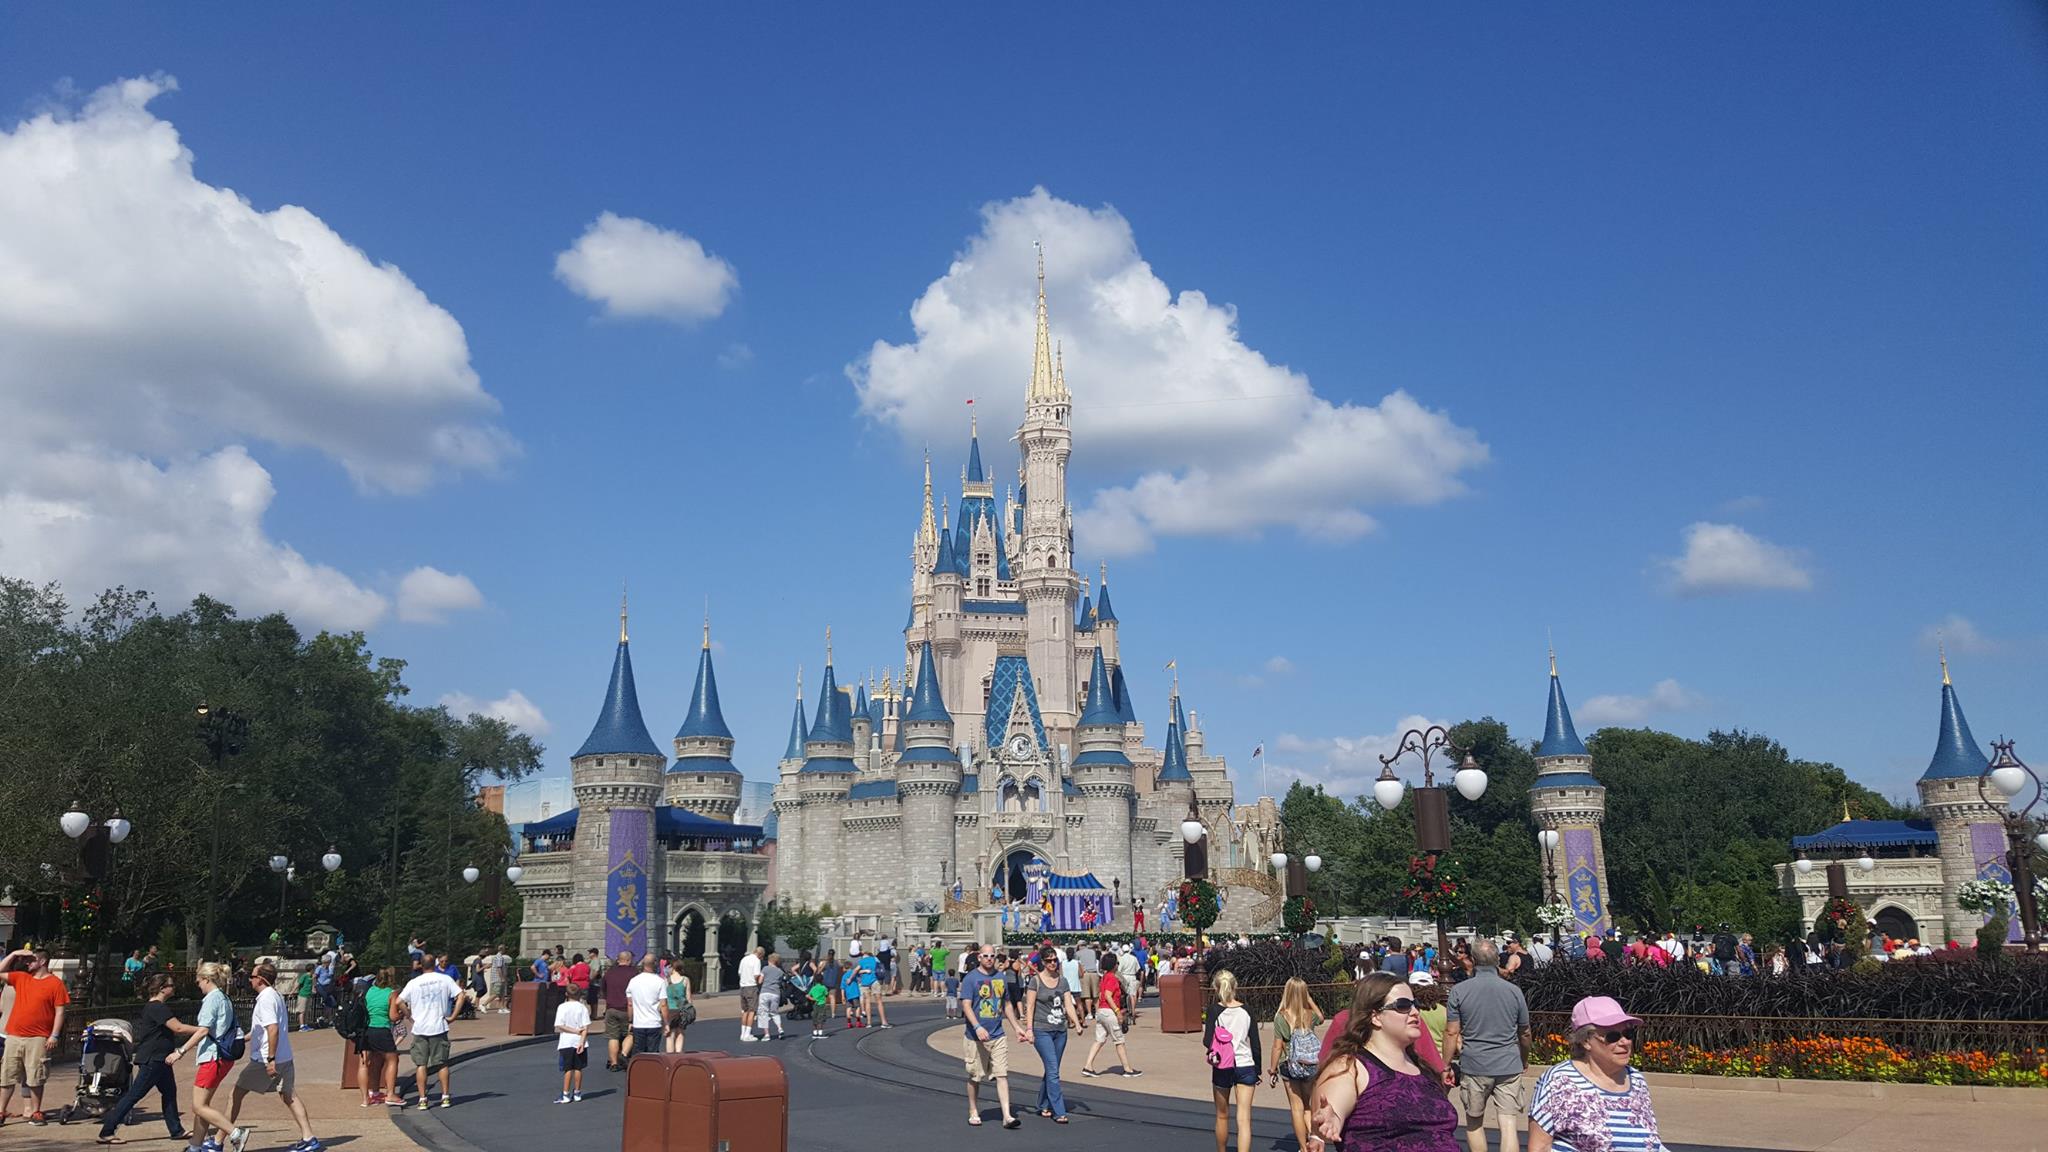 Magic Kingdom is the most visited theme park in the world!